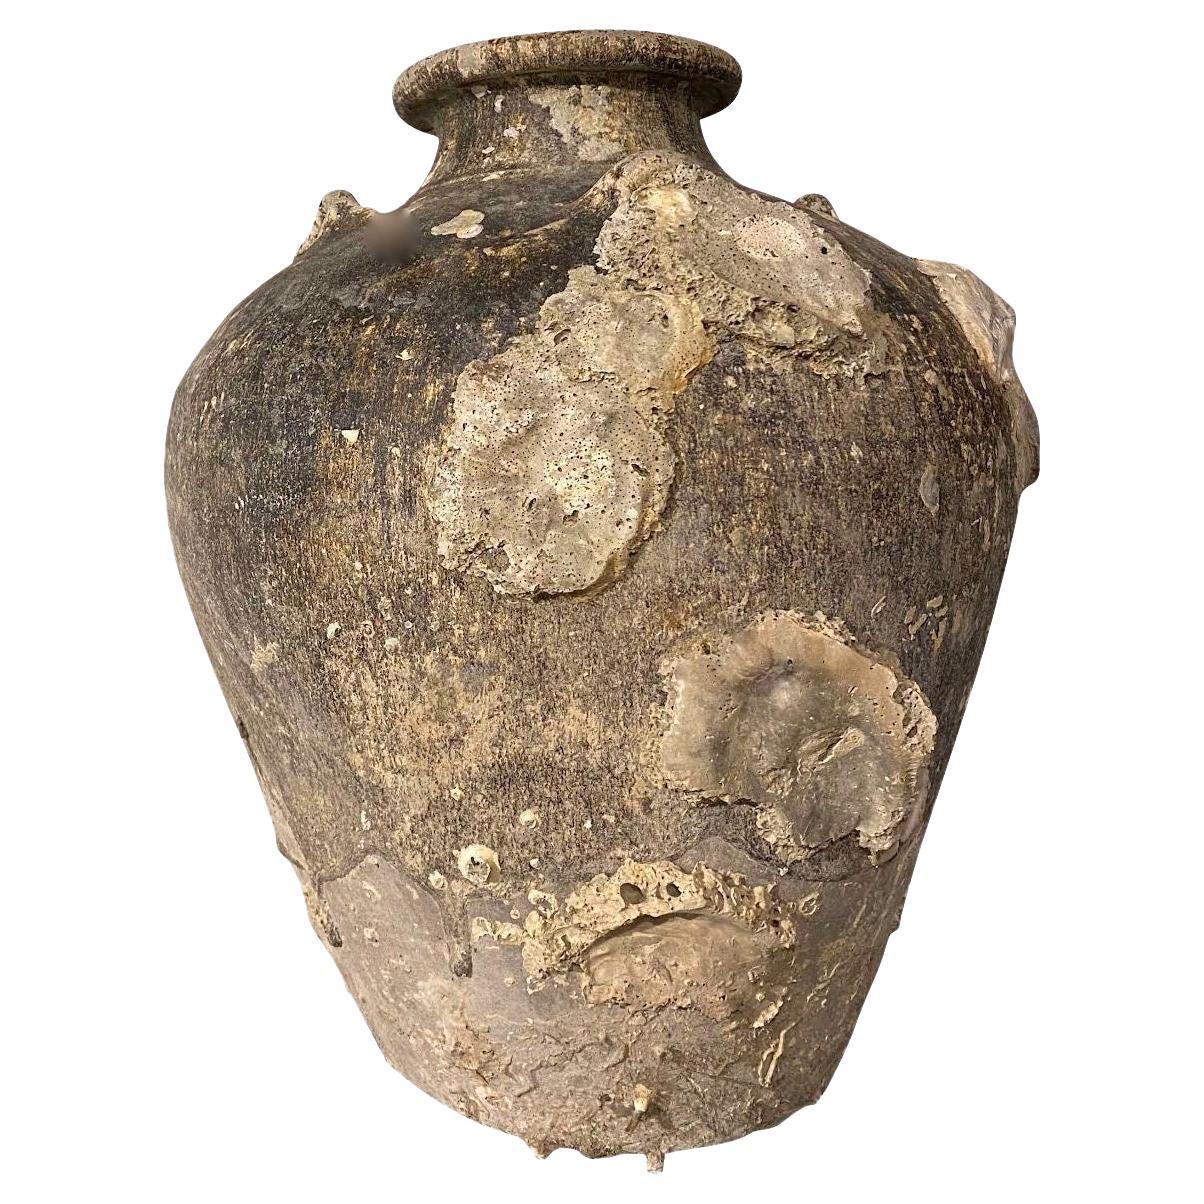 16th century Thailand Sawankhalok vessel from the Turiang shipwreck discovered in 1998 in the South China Sea.
Natural marine growth from being submerged for over 300 years.
From a large collection of vessels that survived and have been